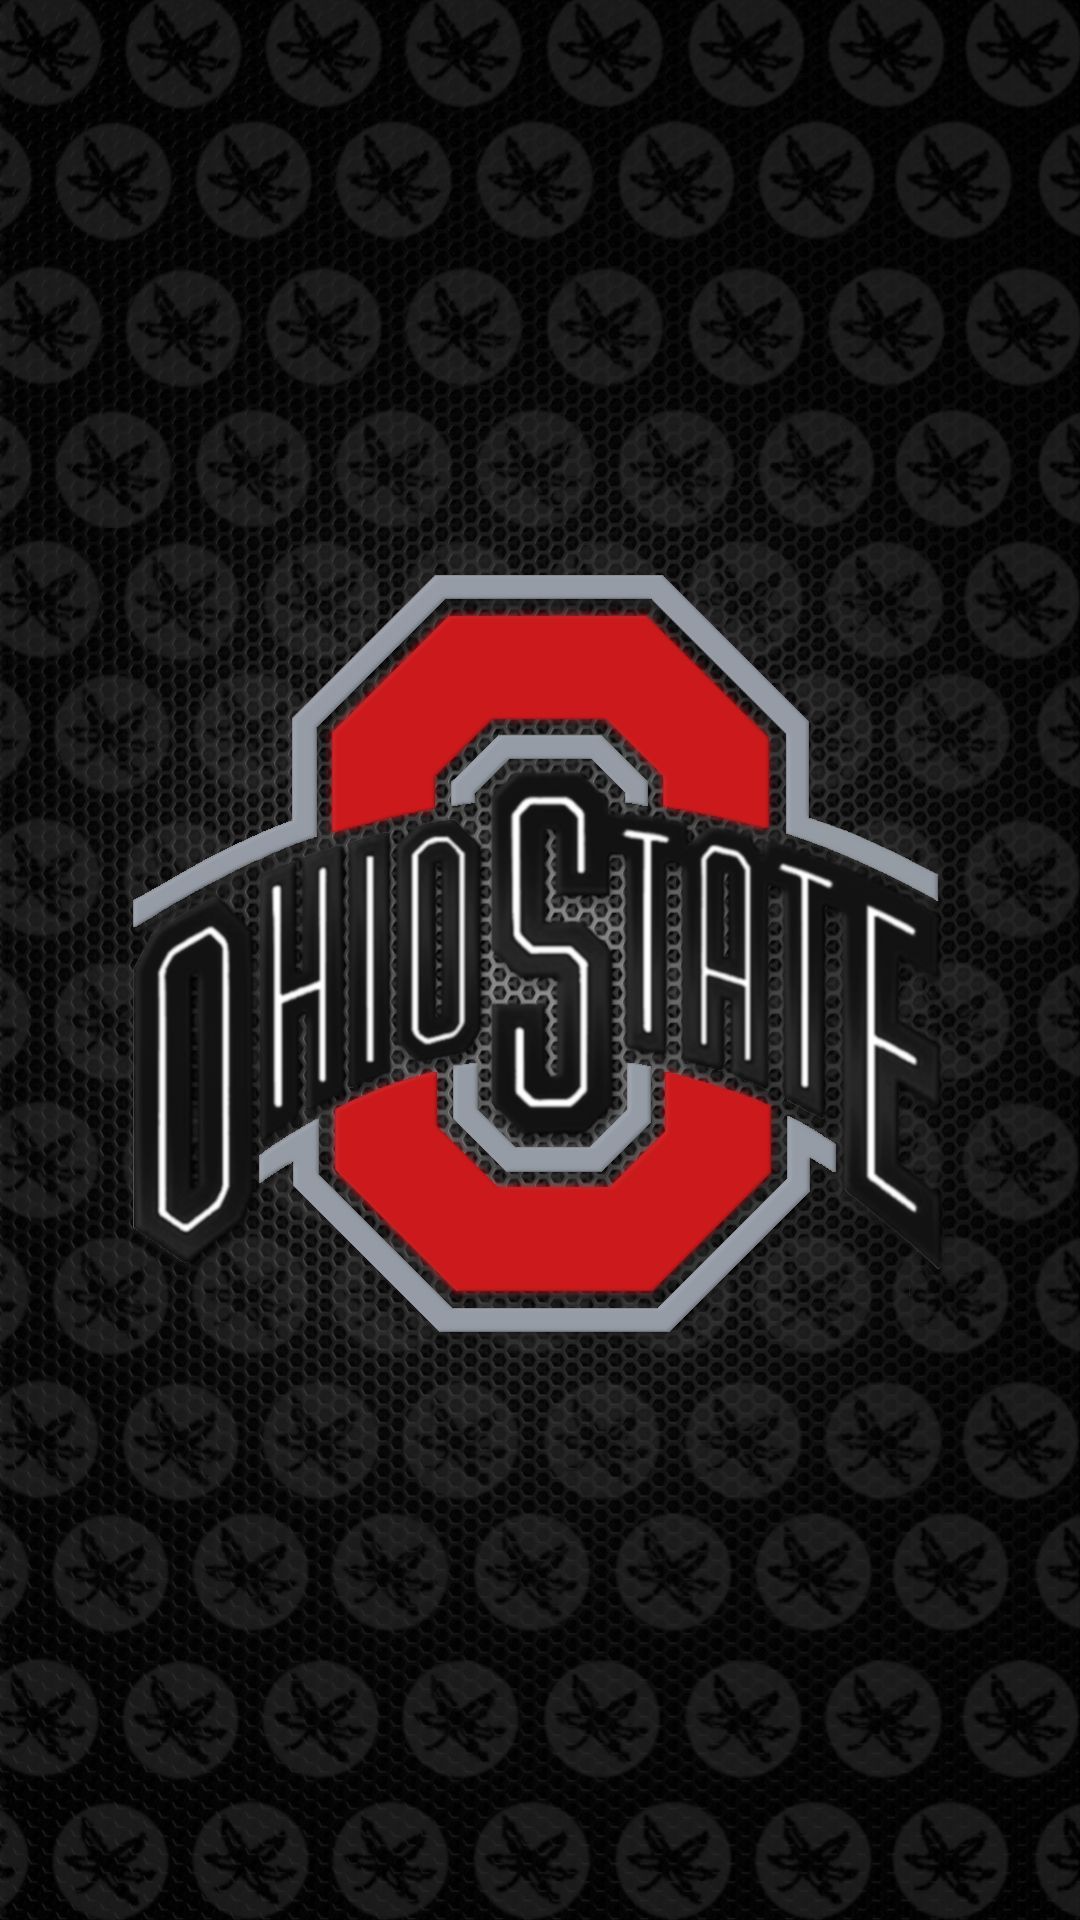 OSU Wallpaper 851 For iPhone 7 & 8 plus. Ohio state wallpaper, Ohio state buckeyes football, Ohio state football